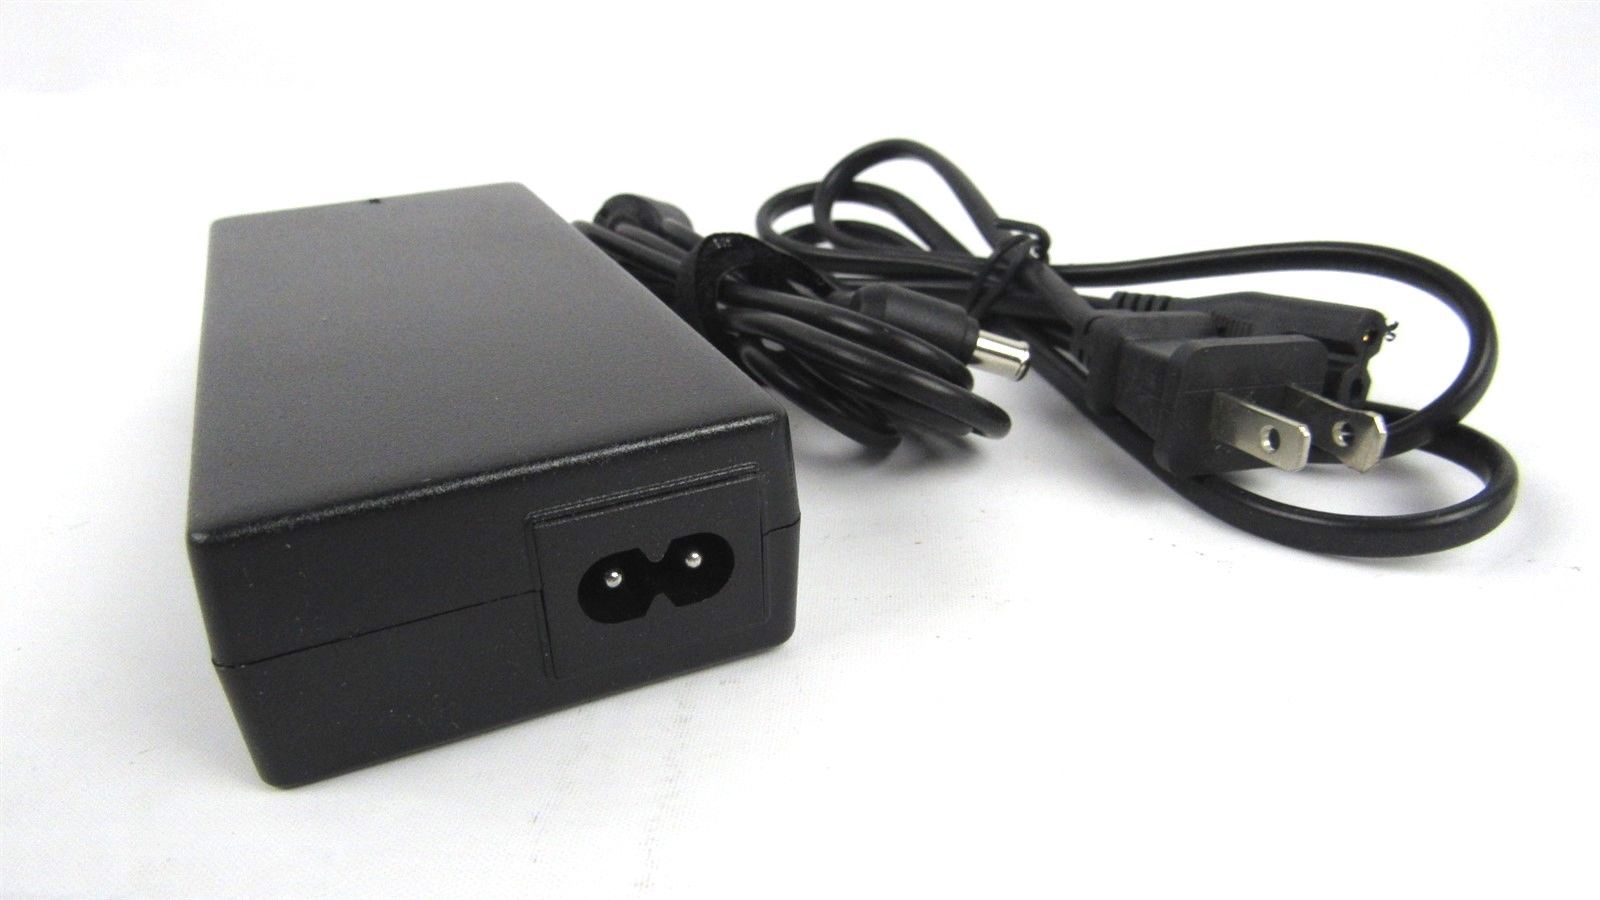 AC Power Adapter with Cord for Sony Vaio 19.5V 4.1A 80W Black PCGA-AC19V3